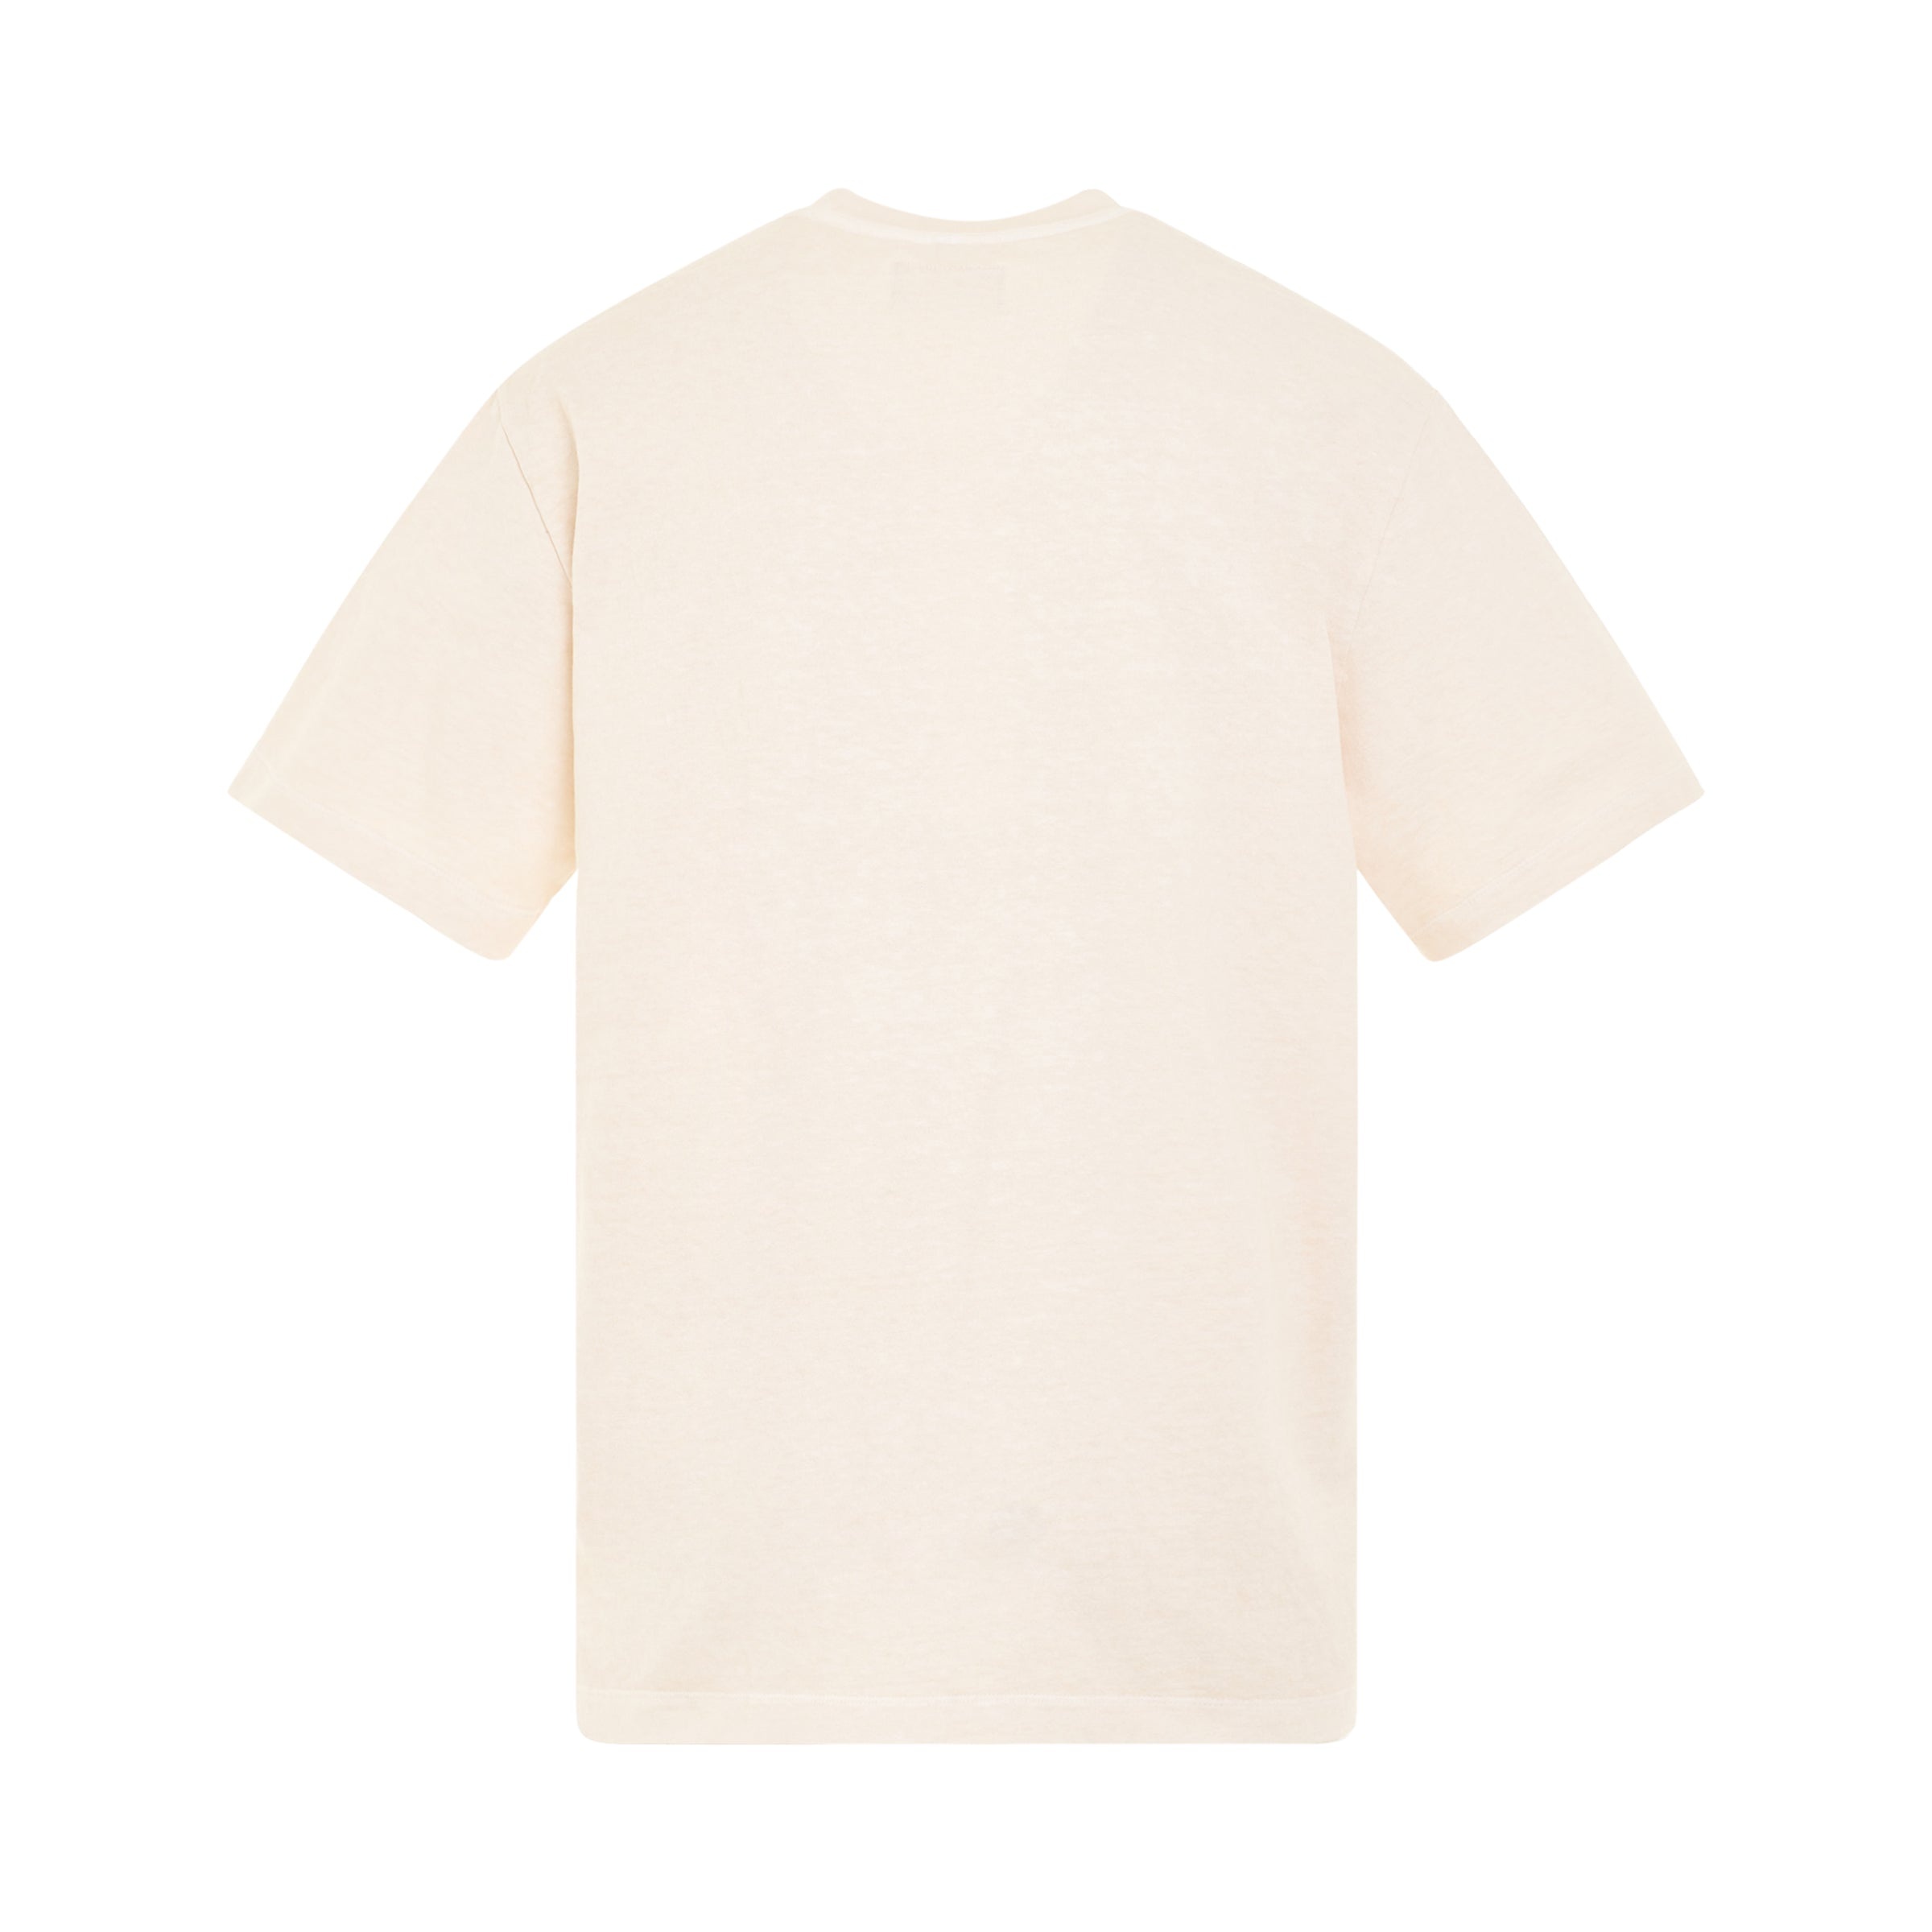 "DOUBLAND" Embroidery T-Shirt in White - 4